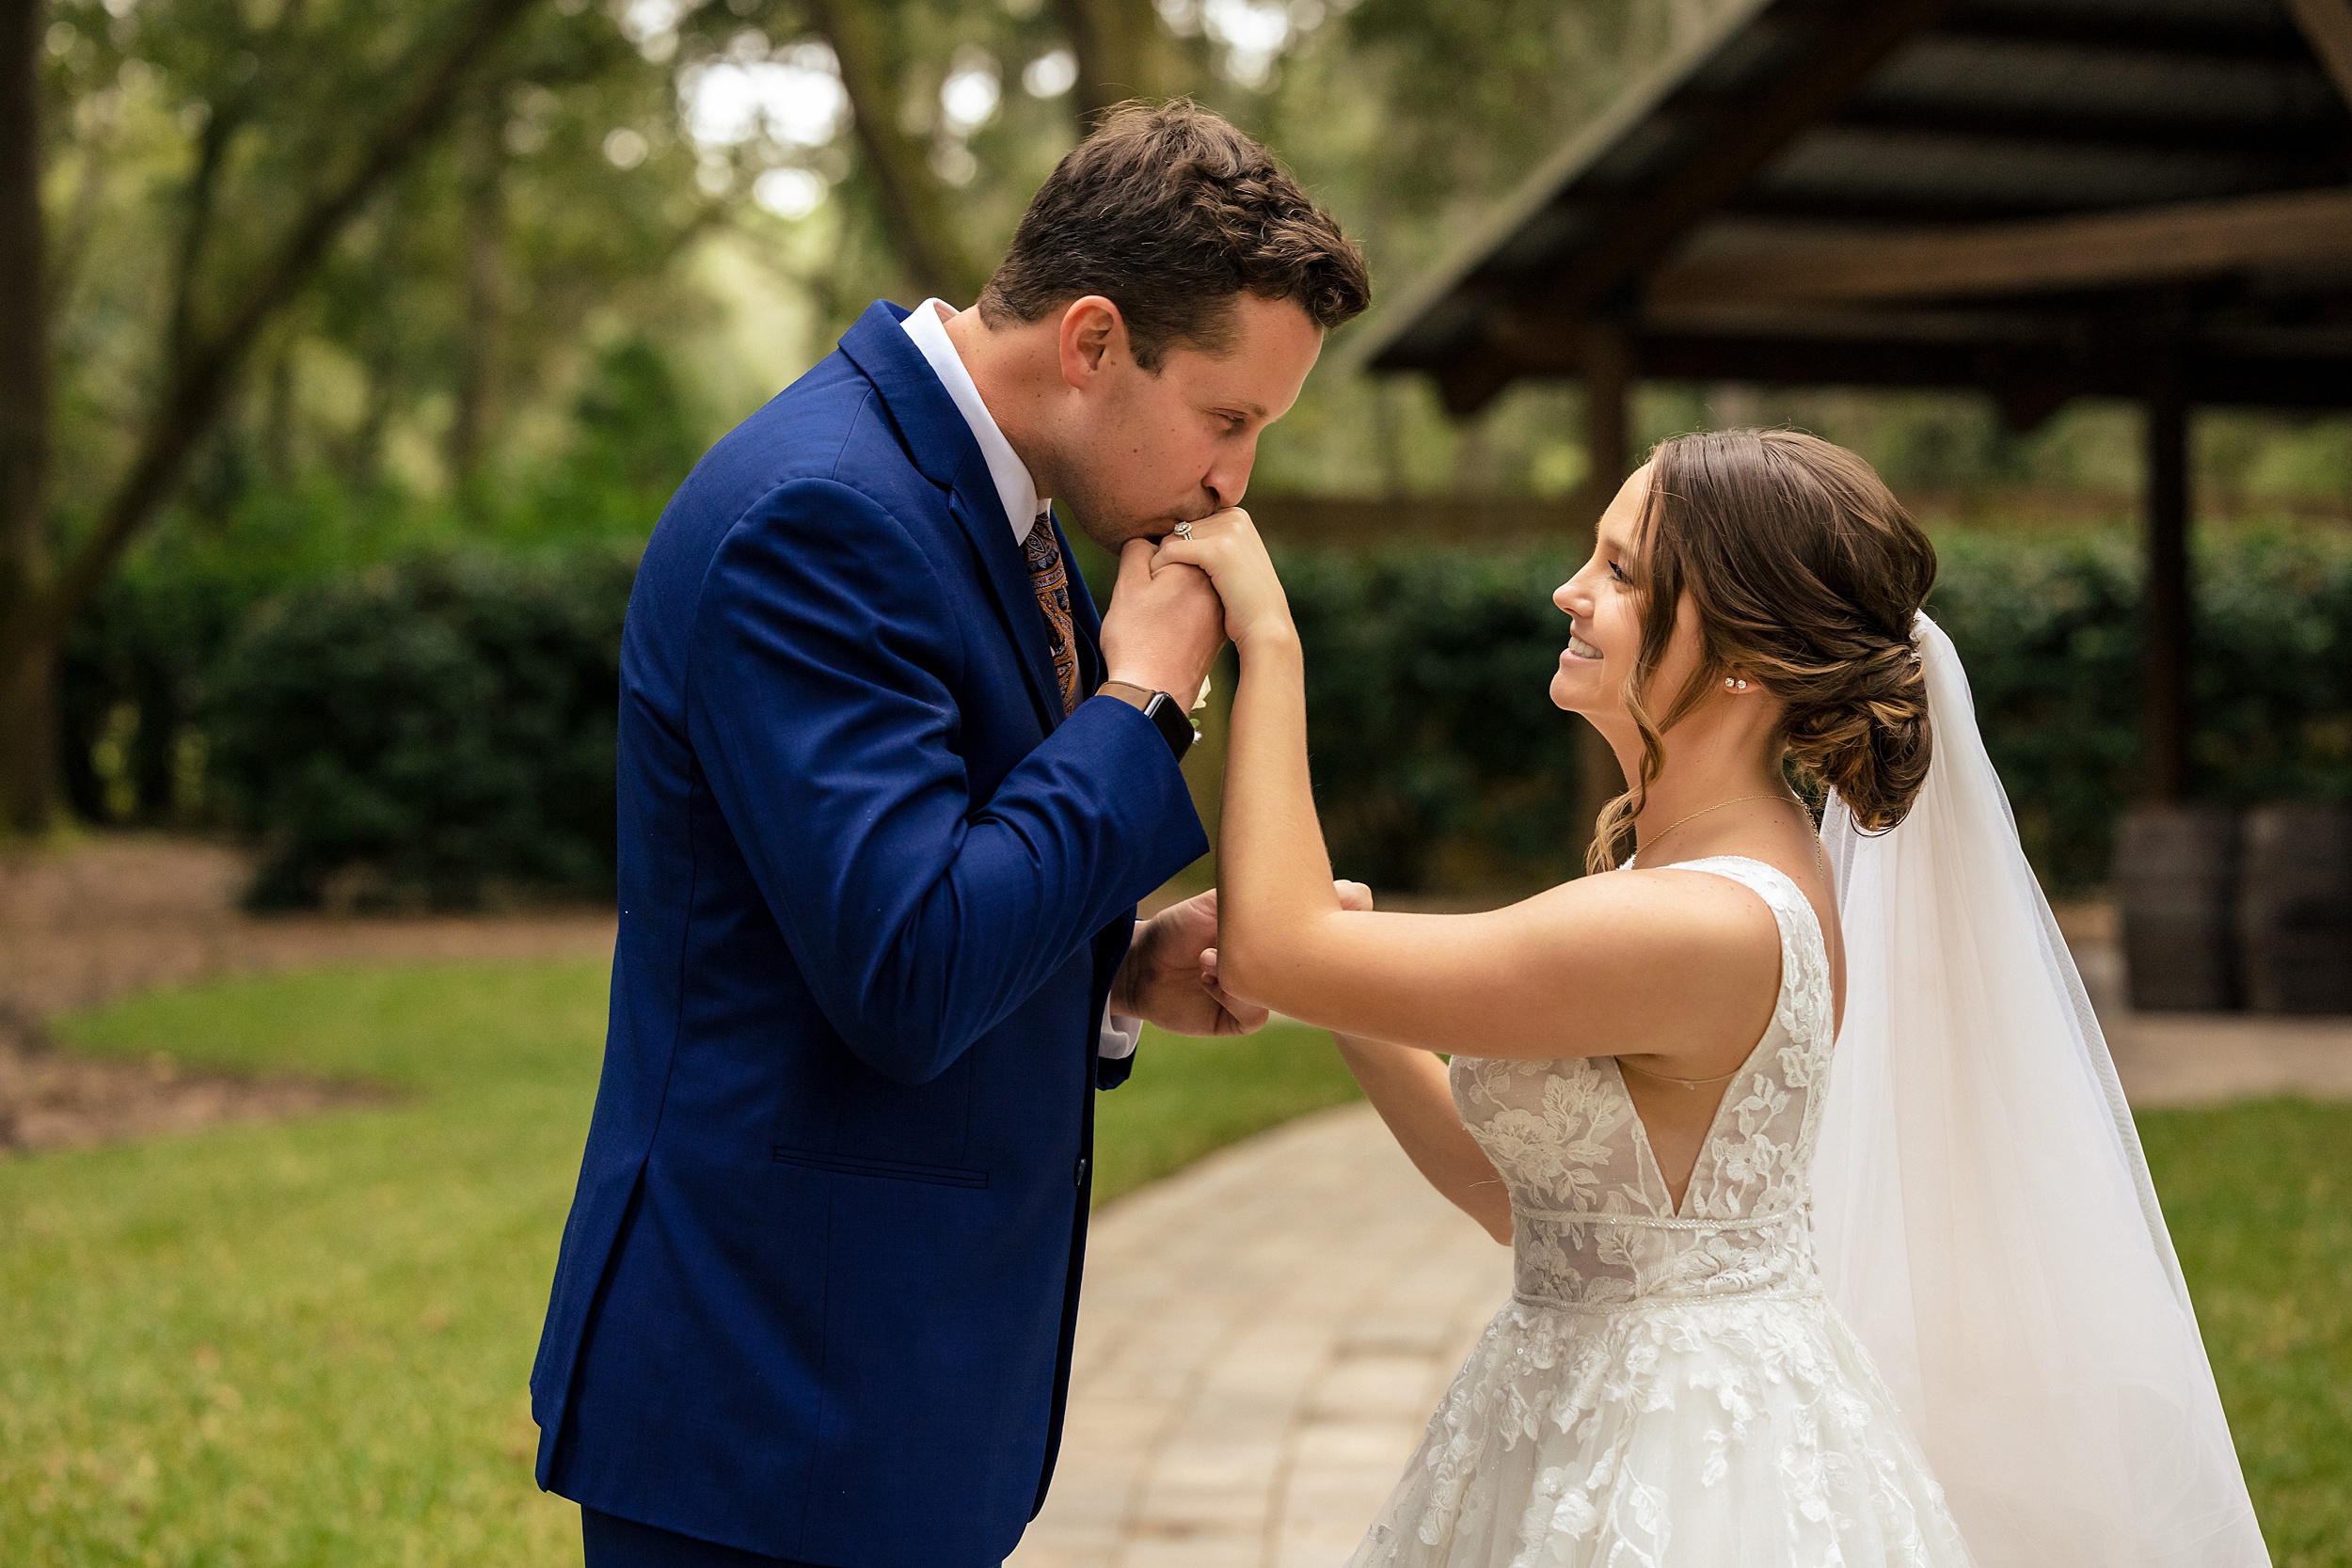 A groom in a blue suit kisses the hand of his bride in a lace dress during their first look